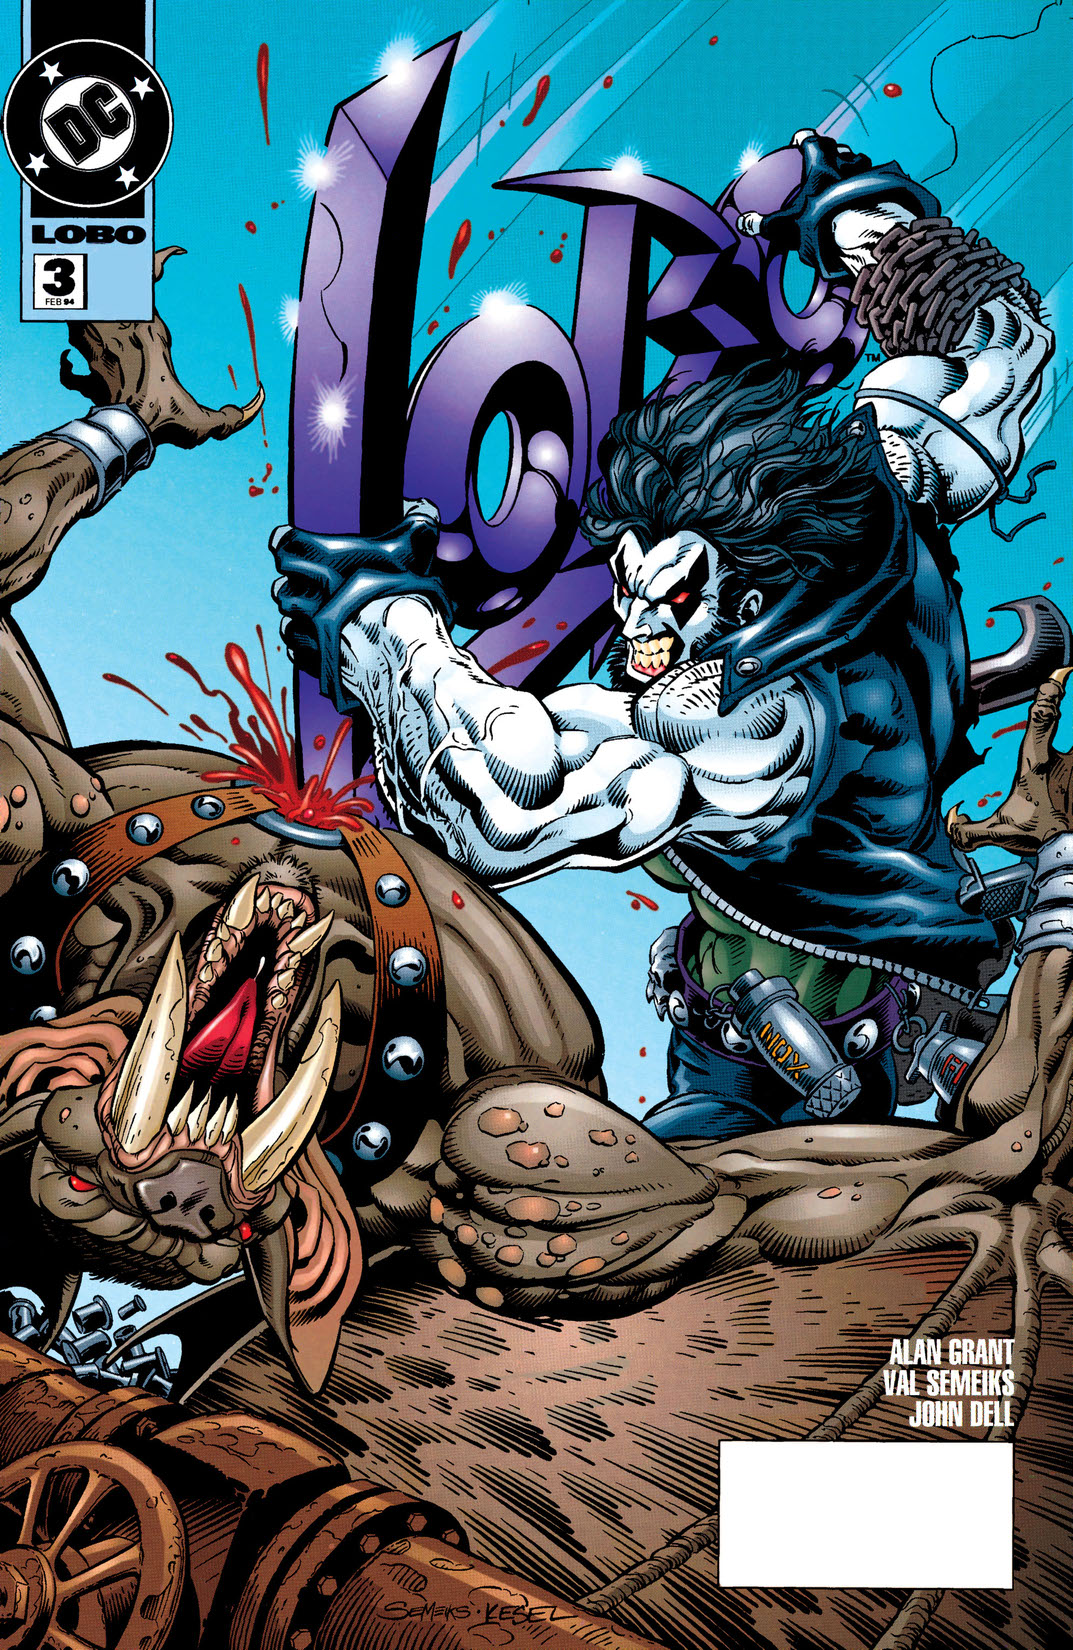 Lobo (1993-) #3 preview images